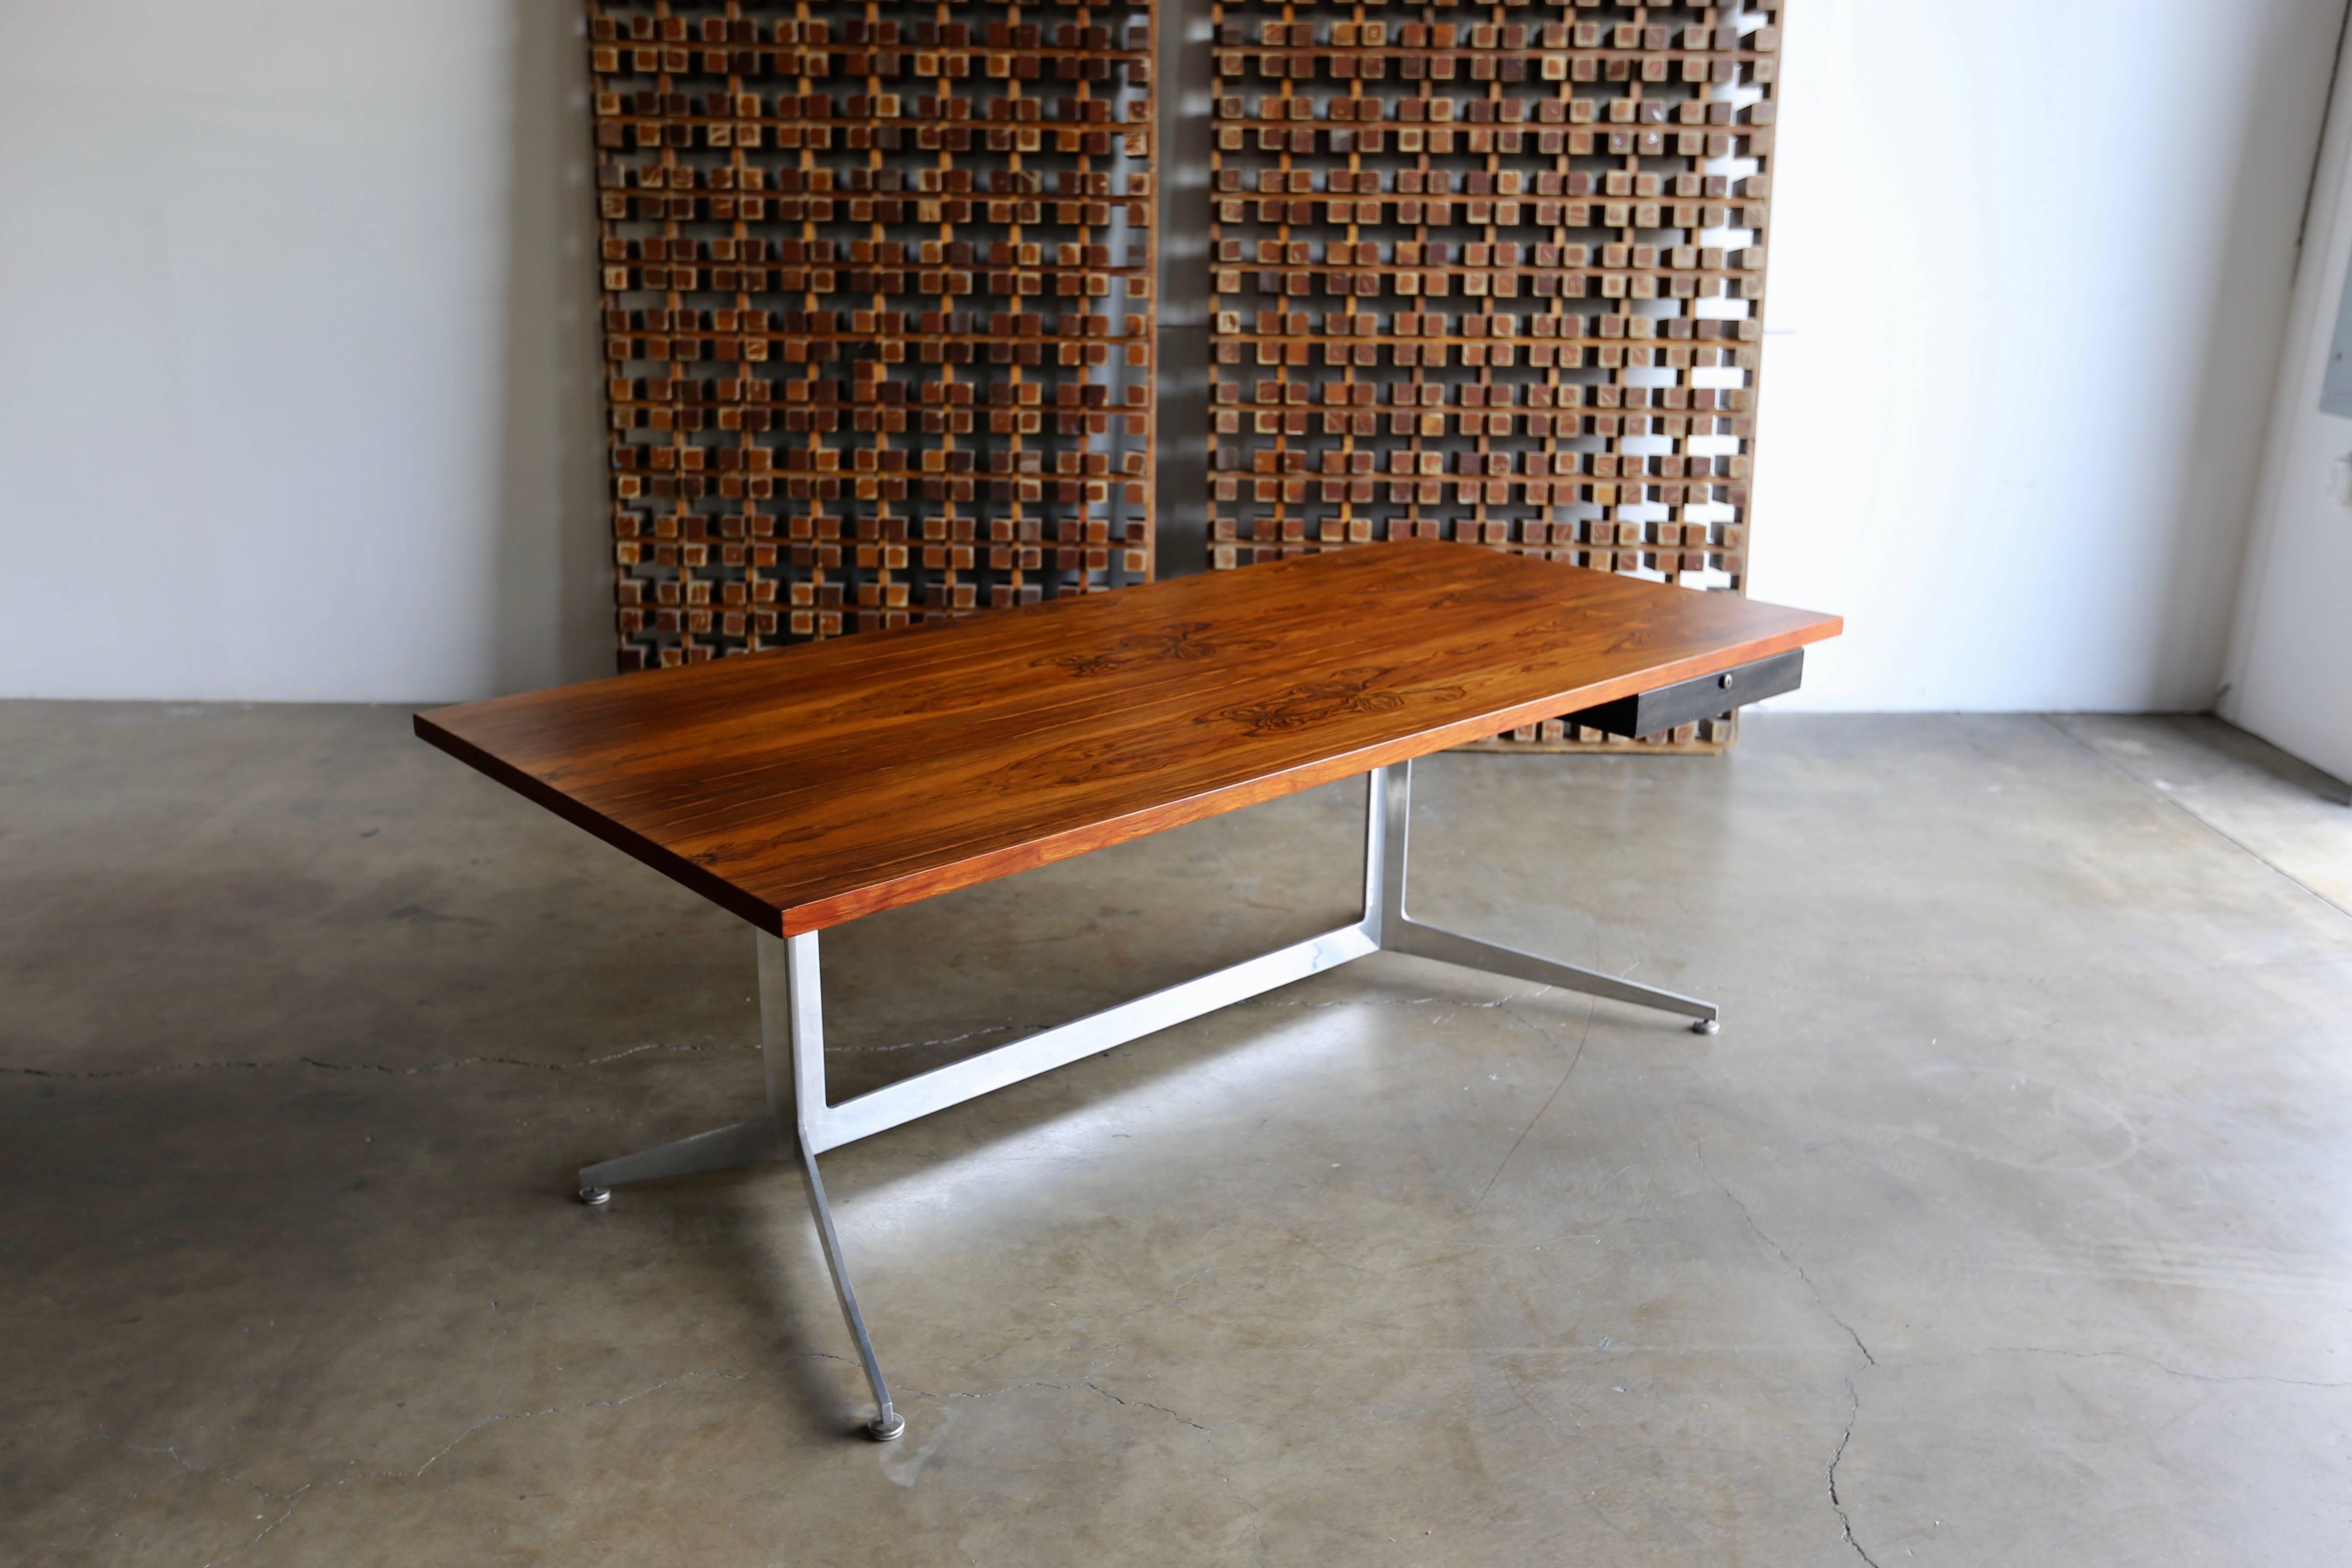 Highly figured rosewood desk by Ward Bennett for Lehigh Leopold, circa 1965. This desk features a single drawer.